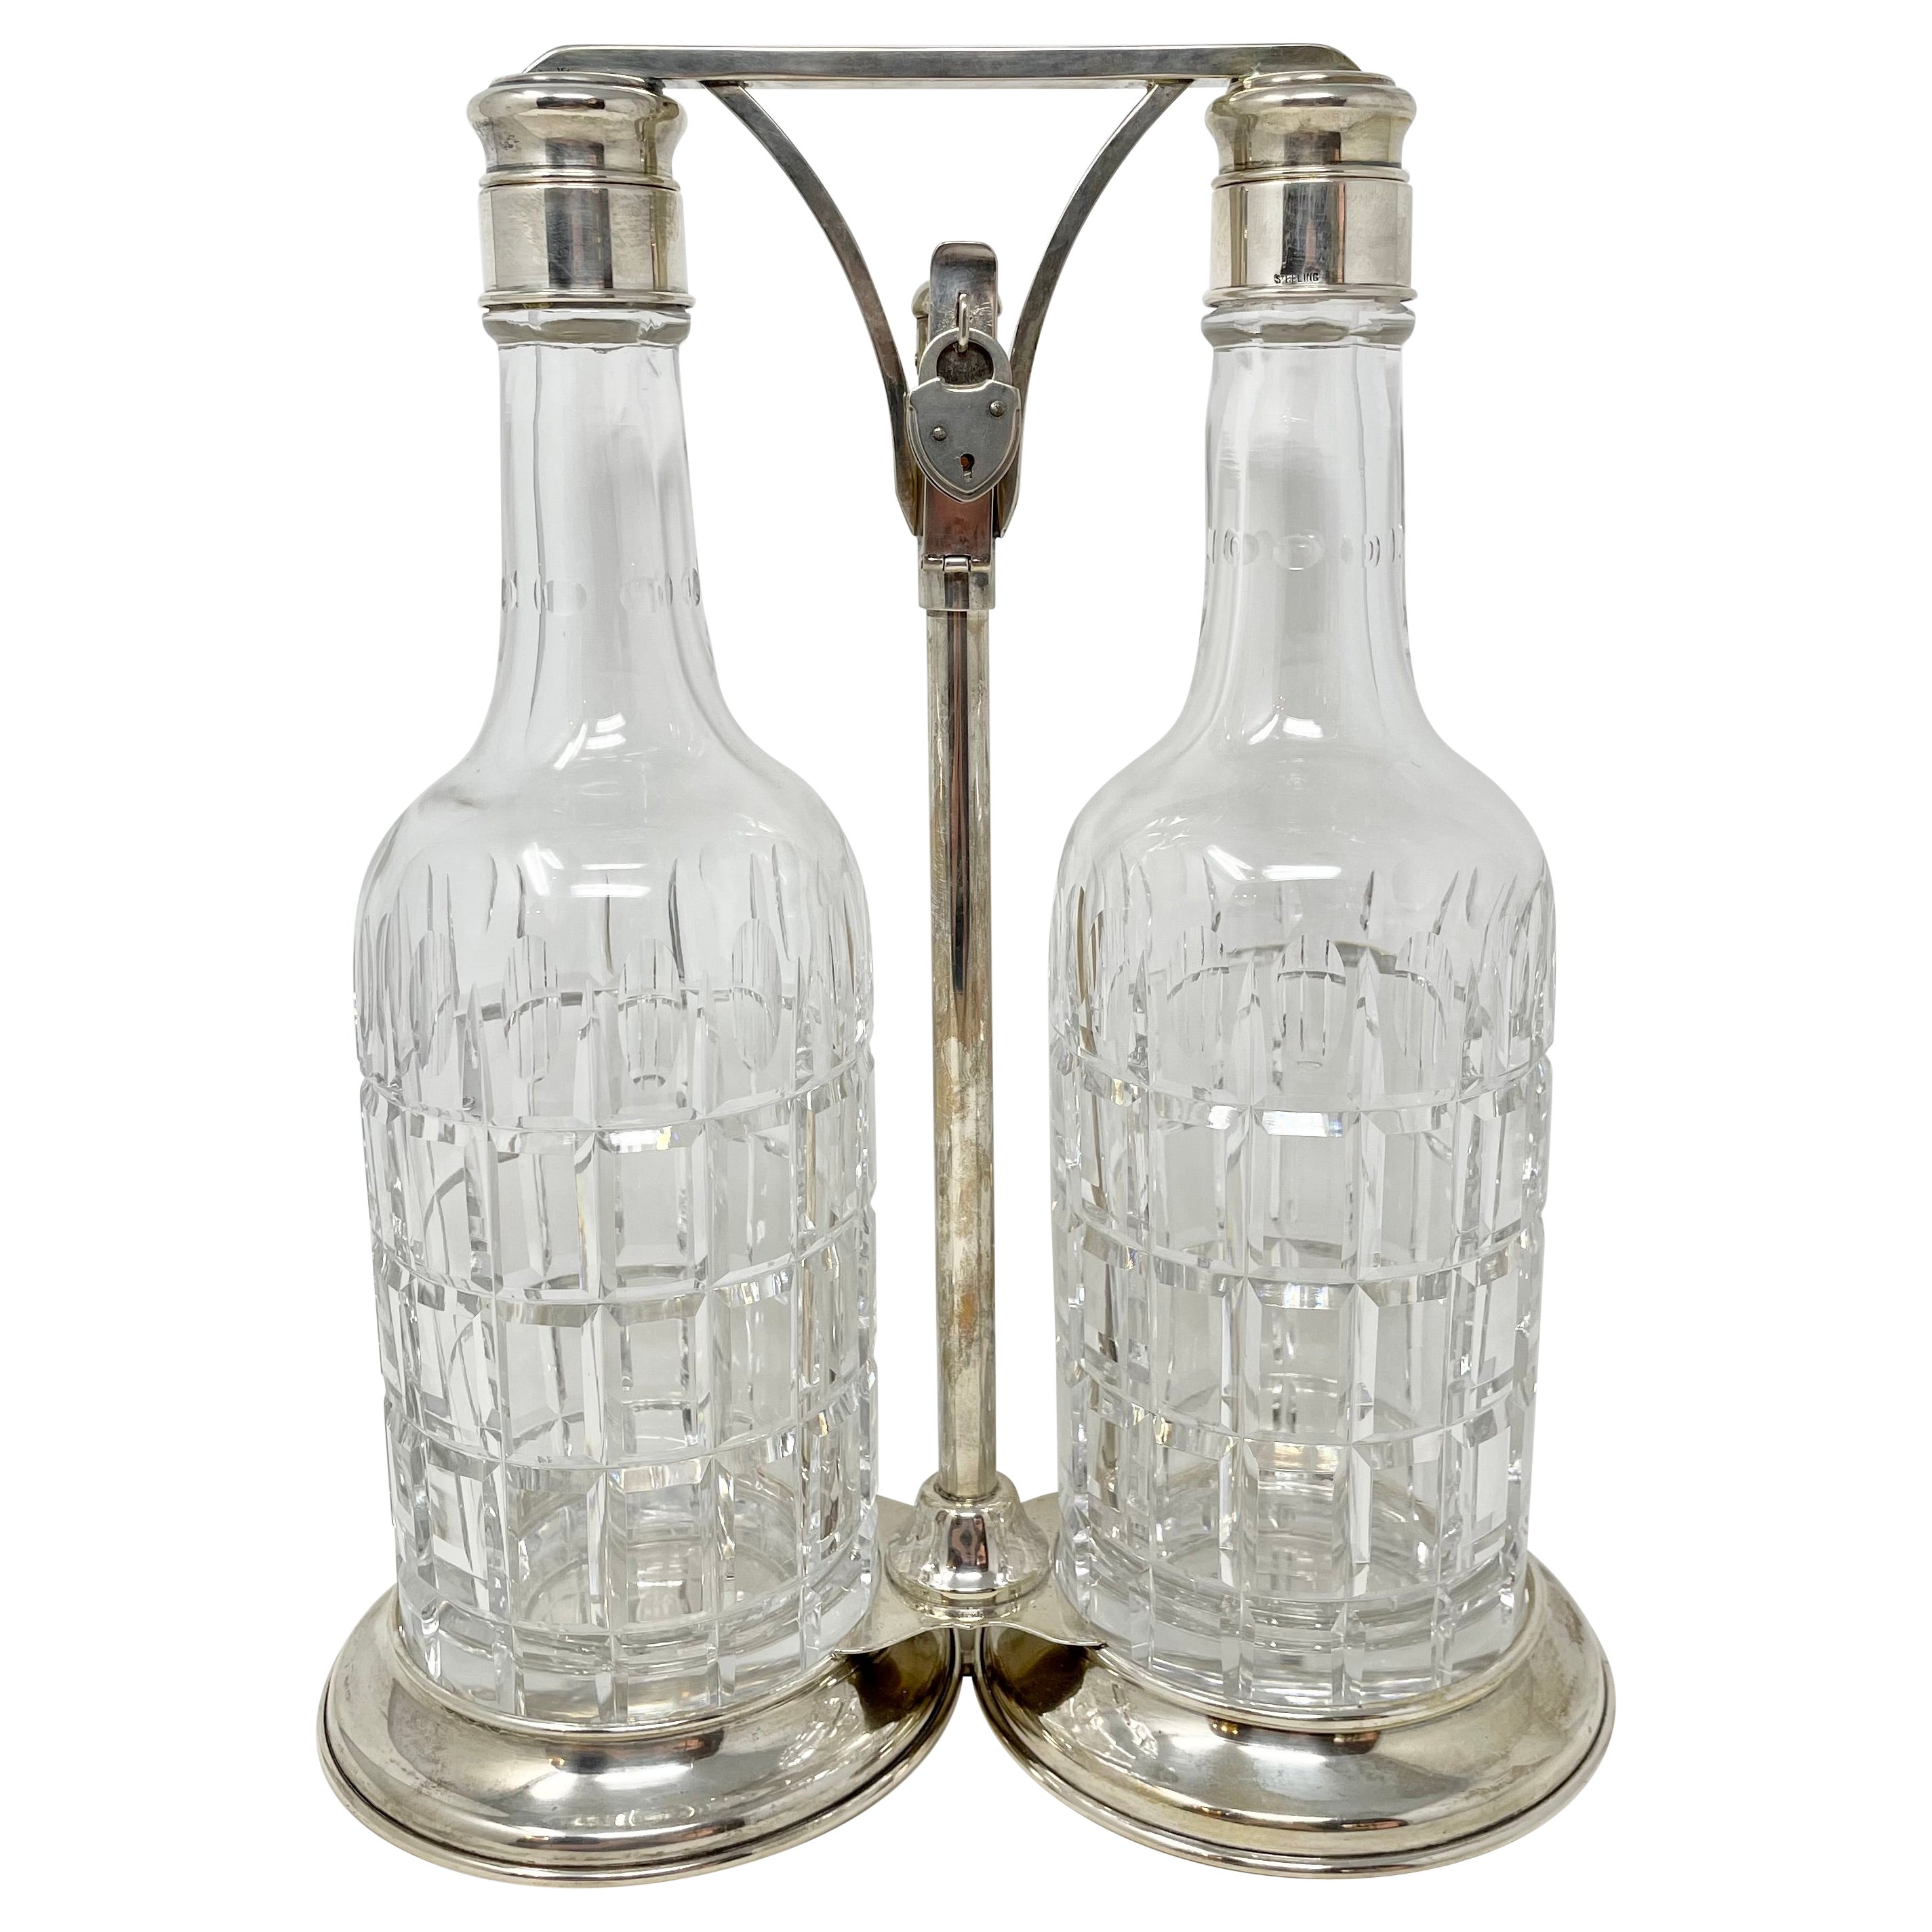 Antique American Sterling Silver & Cut Crystal 2-Bottle "Hawkes" Decanter Set. For Sale